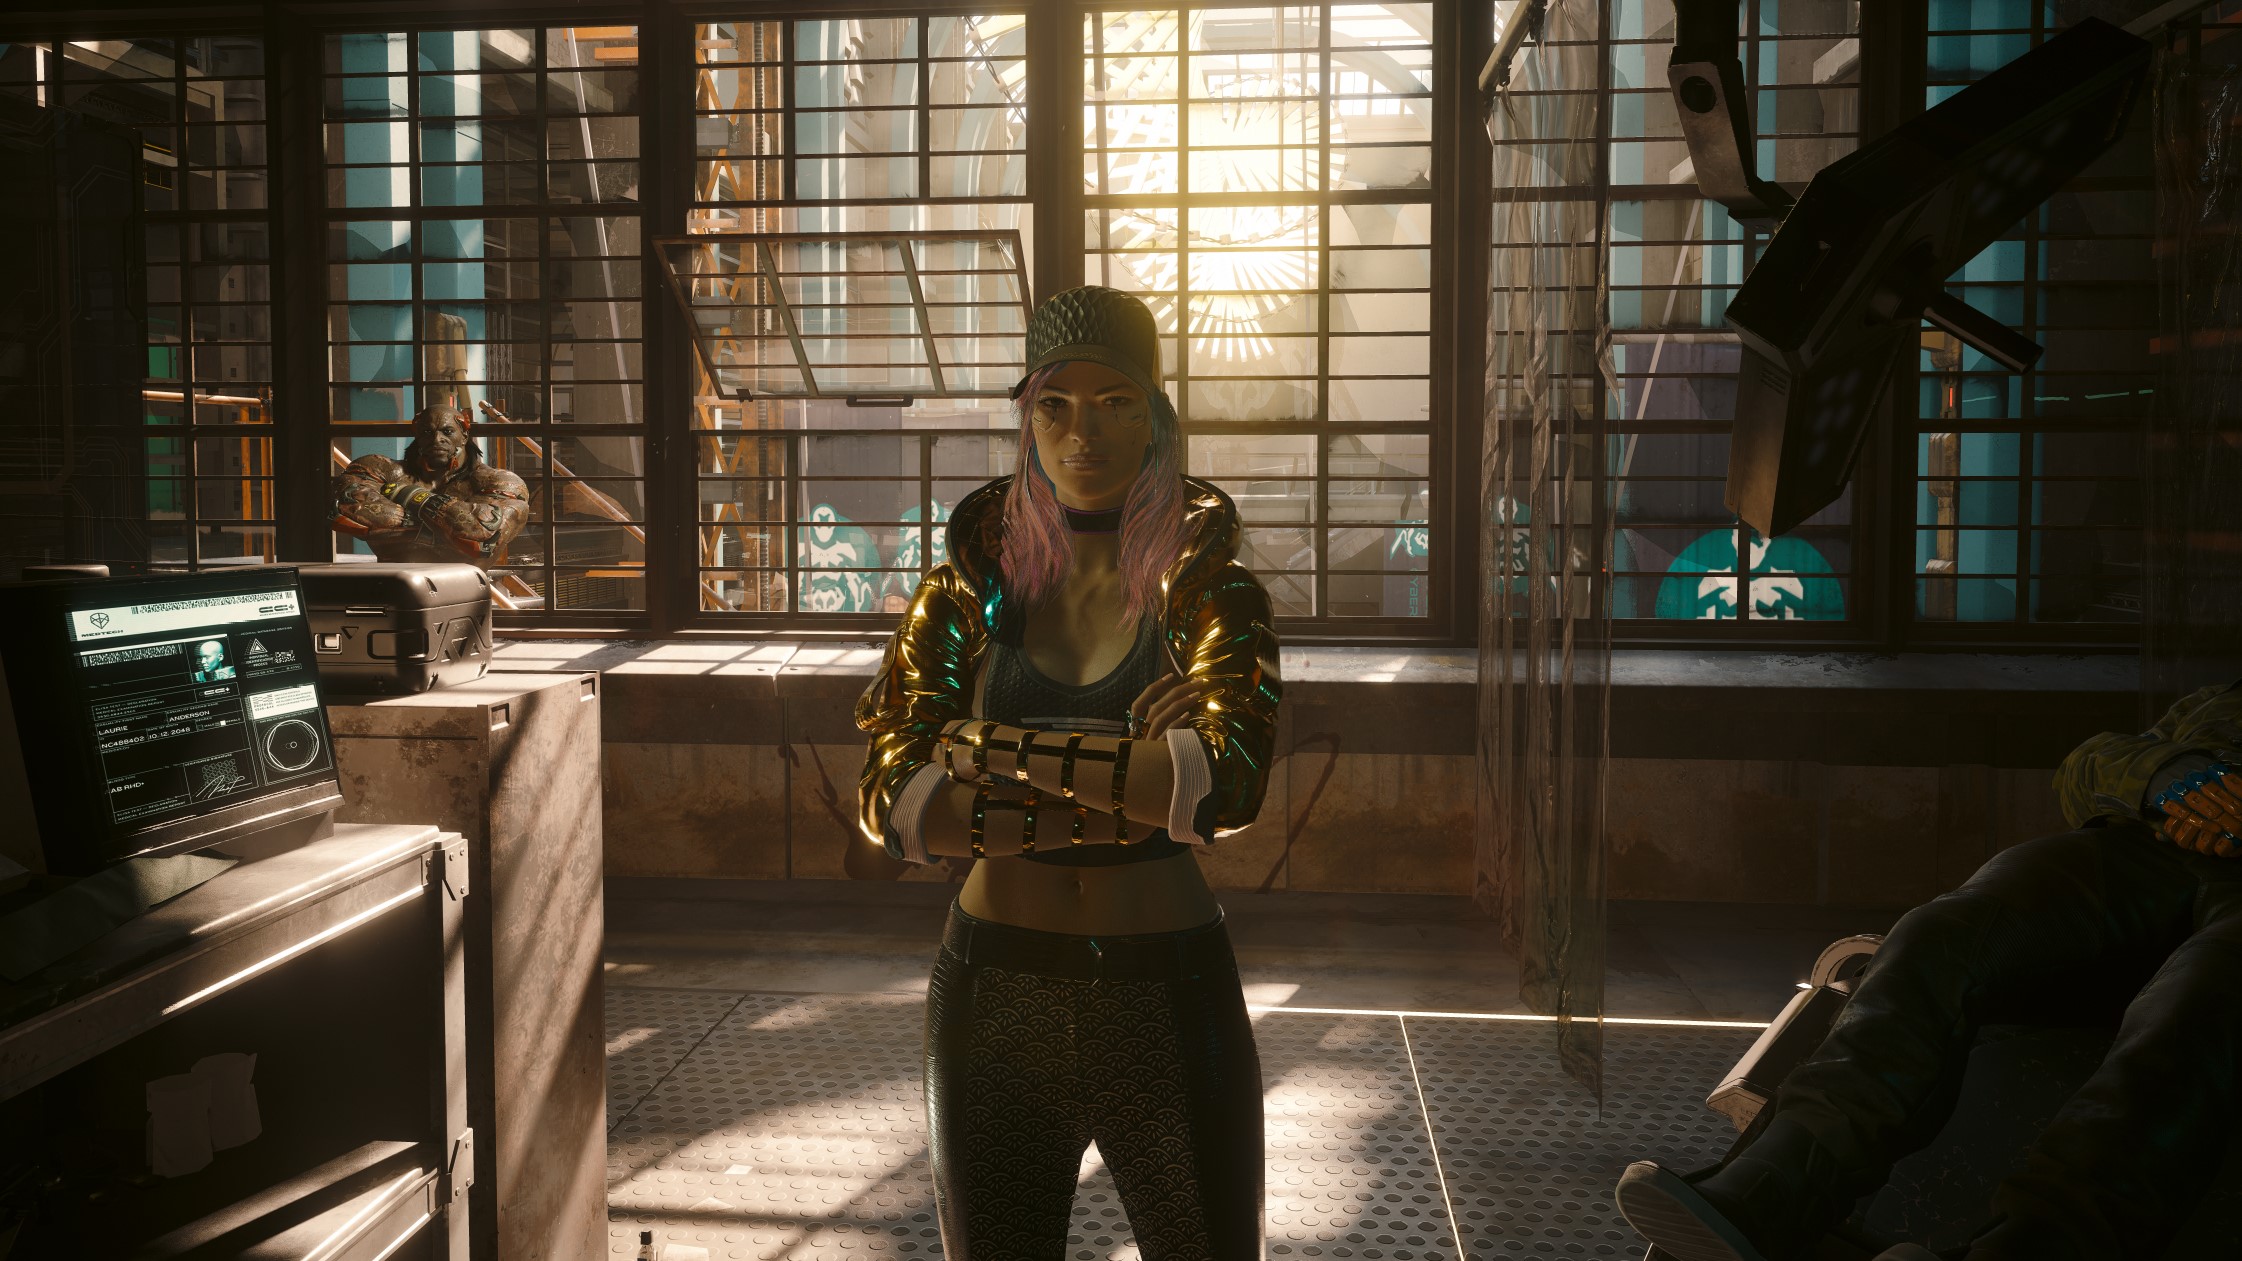  Cyberpunk 2077 No Easy Way Out: Should you side with Aaron or Angie? 